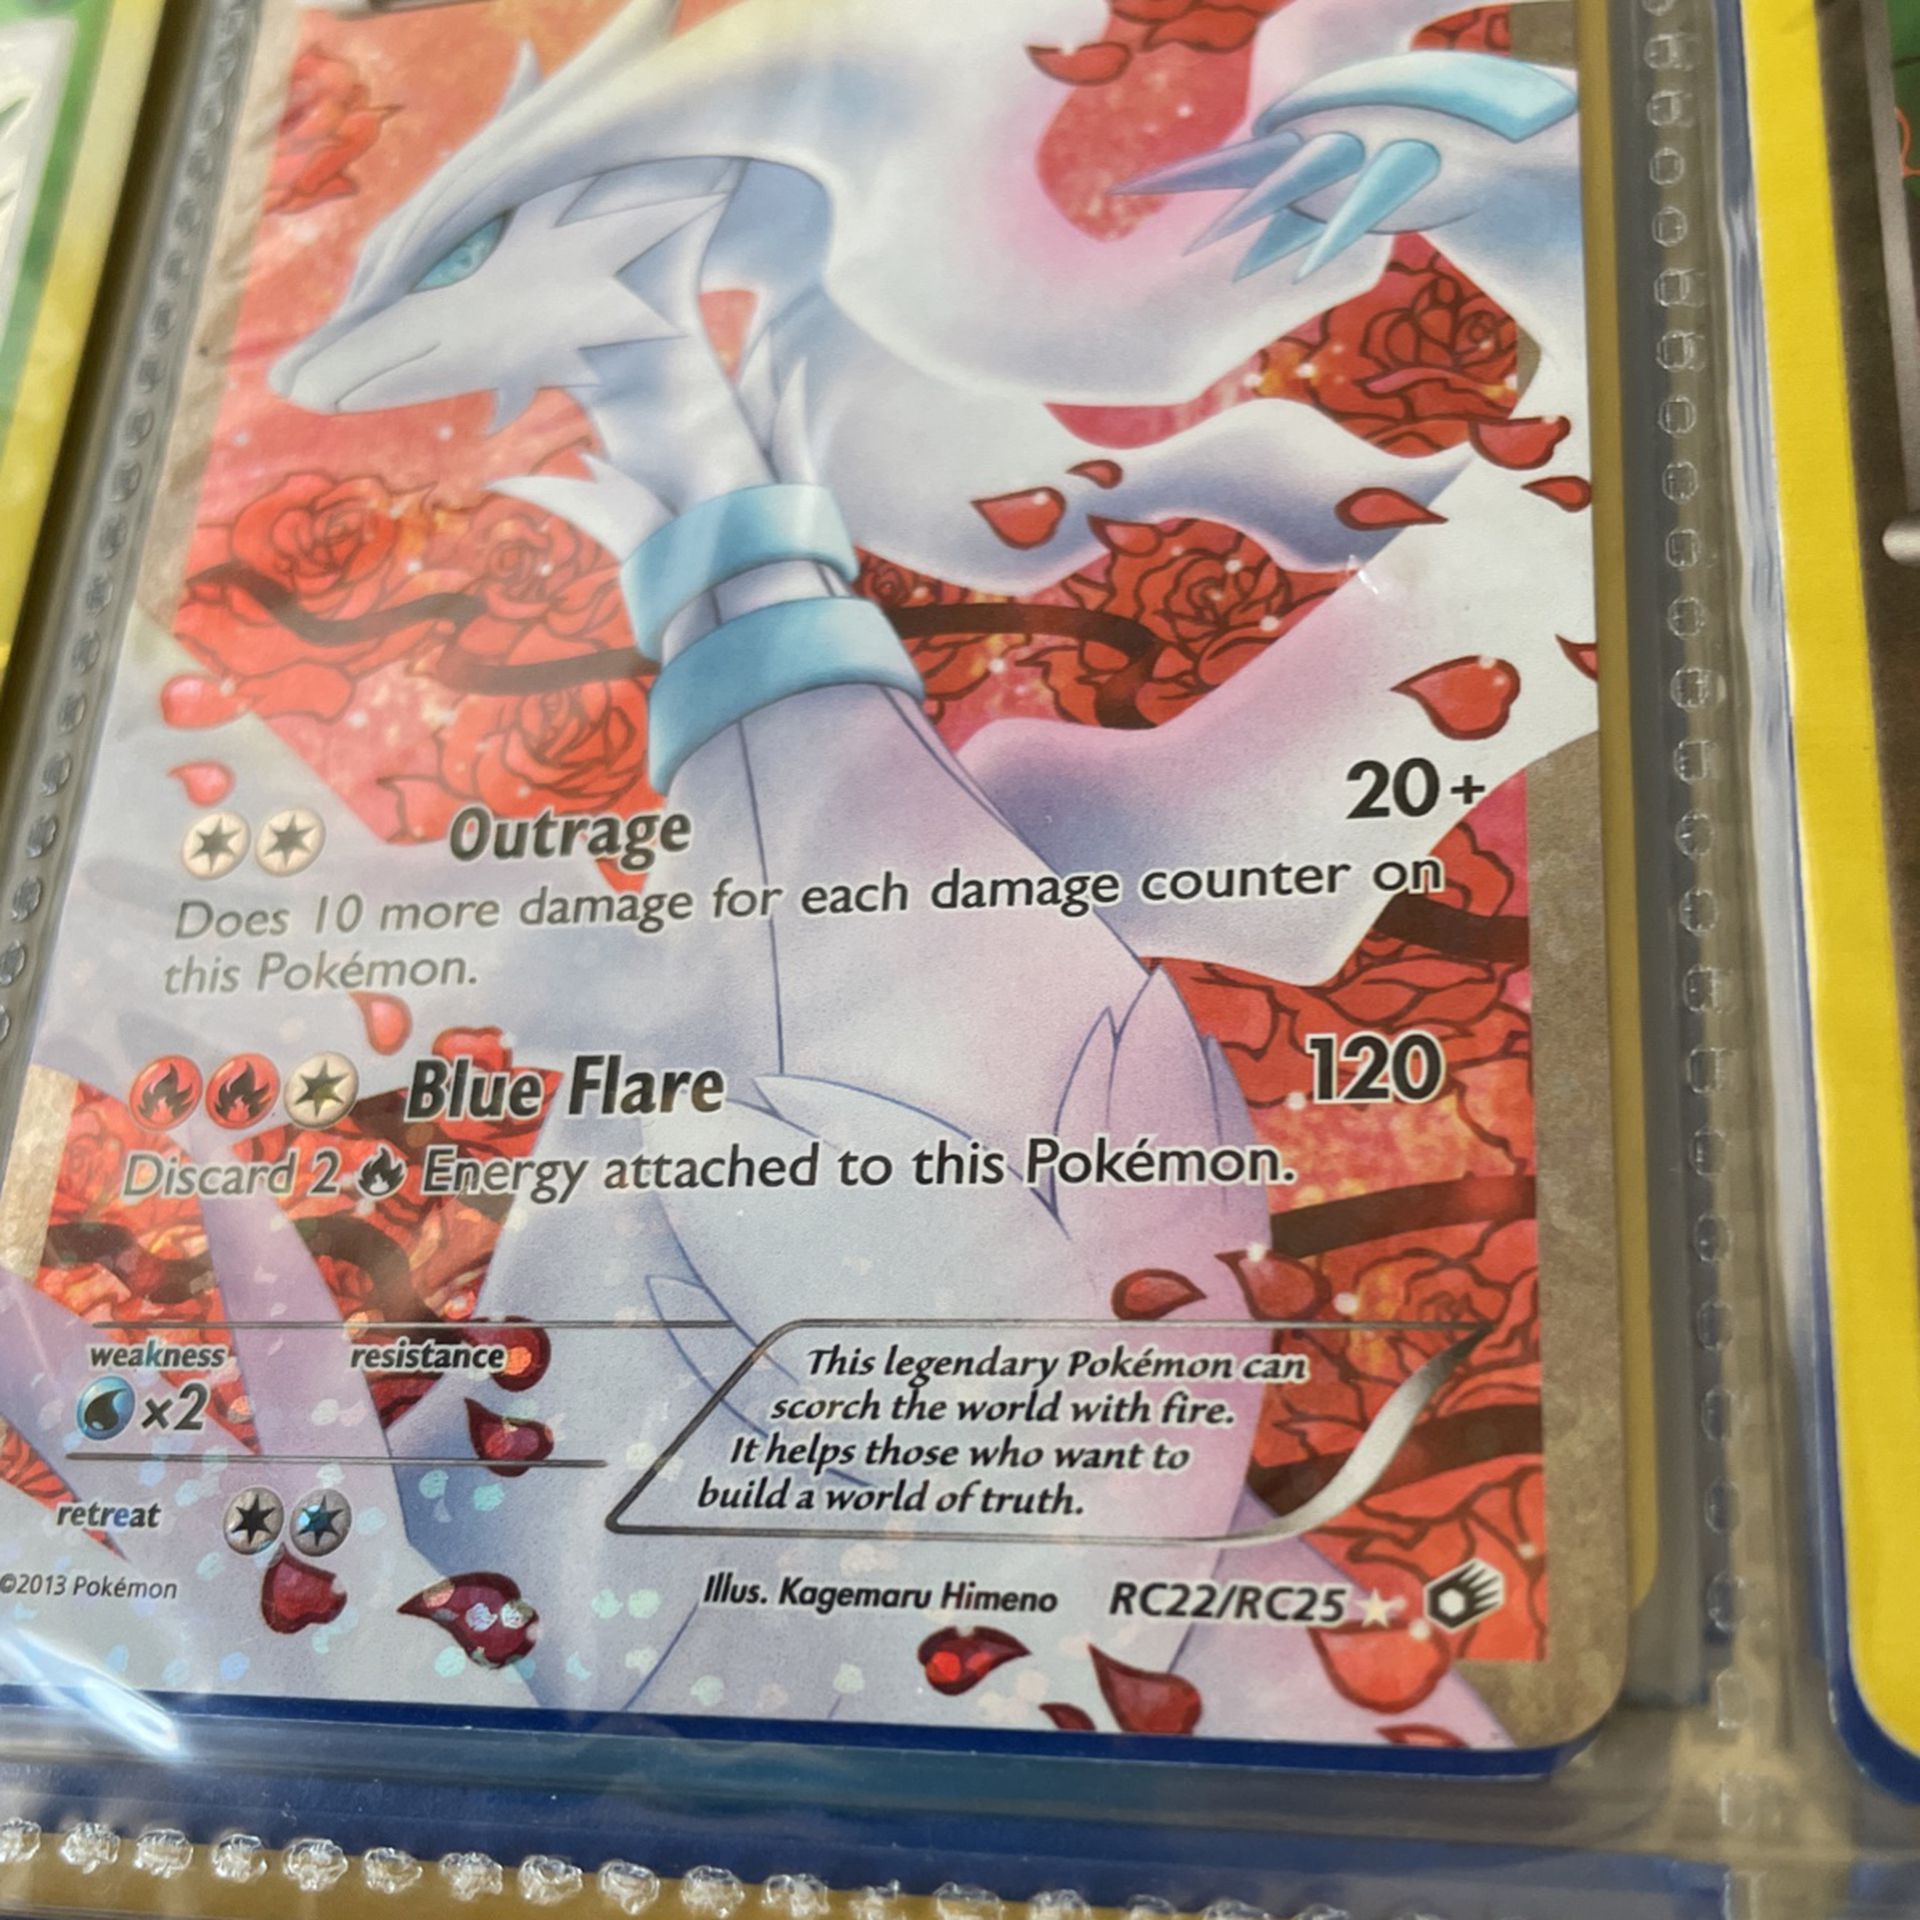 Reshiram V (Full Art) - Silver Tempest for Sale in Olympia, WA - OfferUp